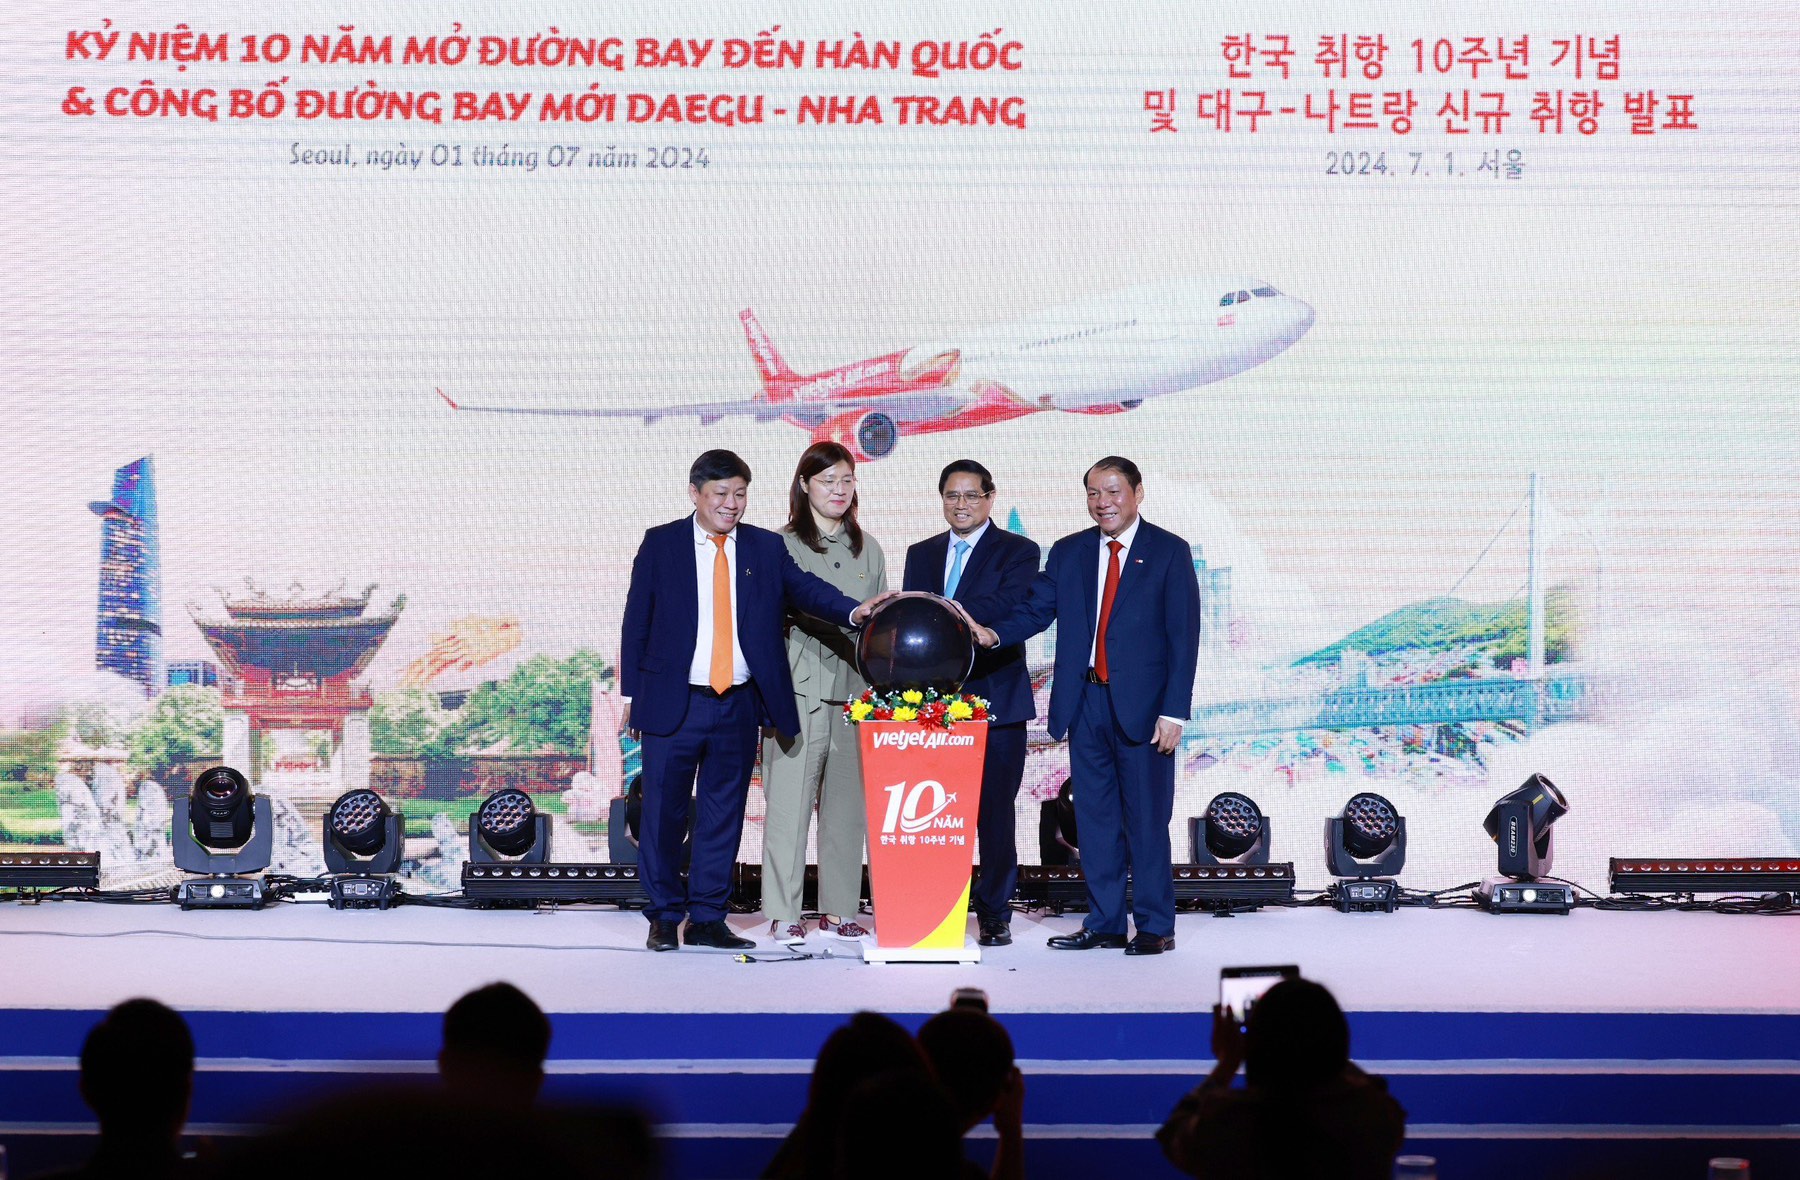 Vietjet's_10th_Anniversary_of_Air_Connectivity_between_Vietnam_and (2)